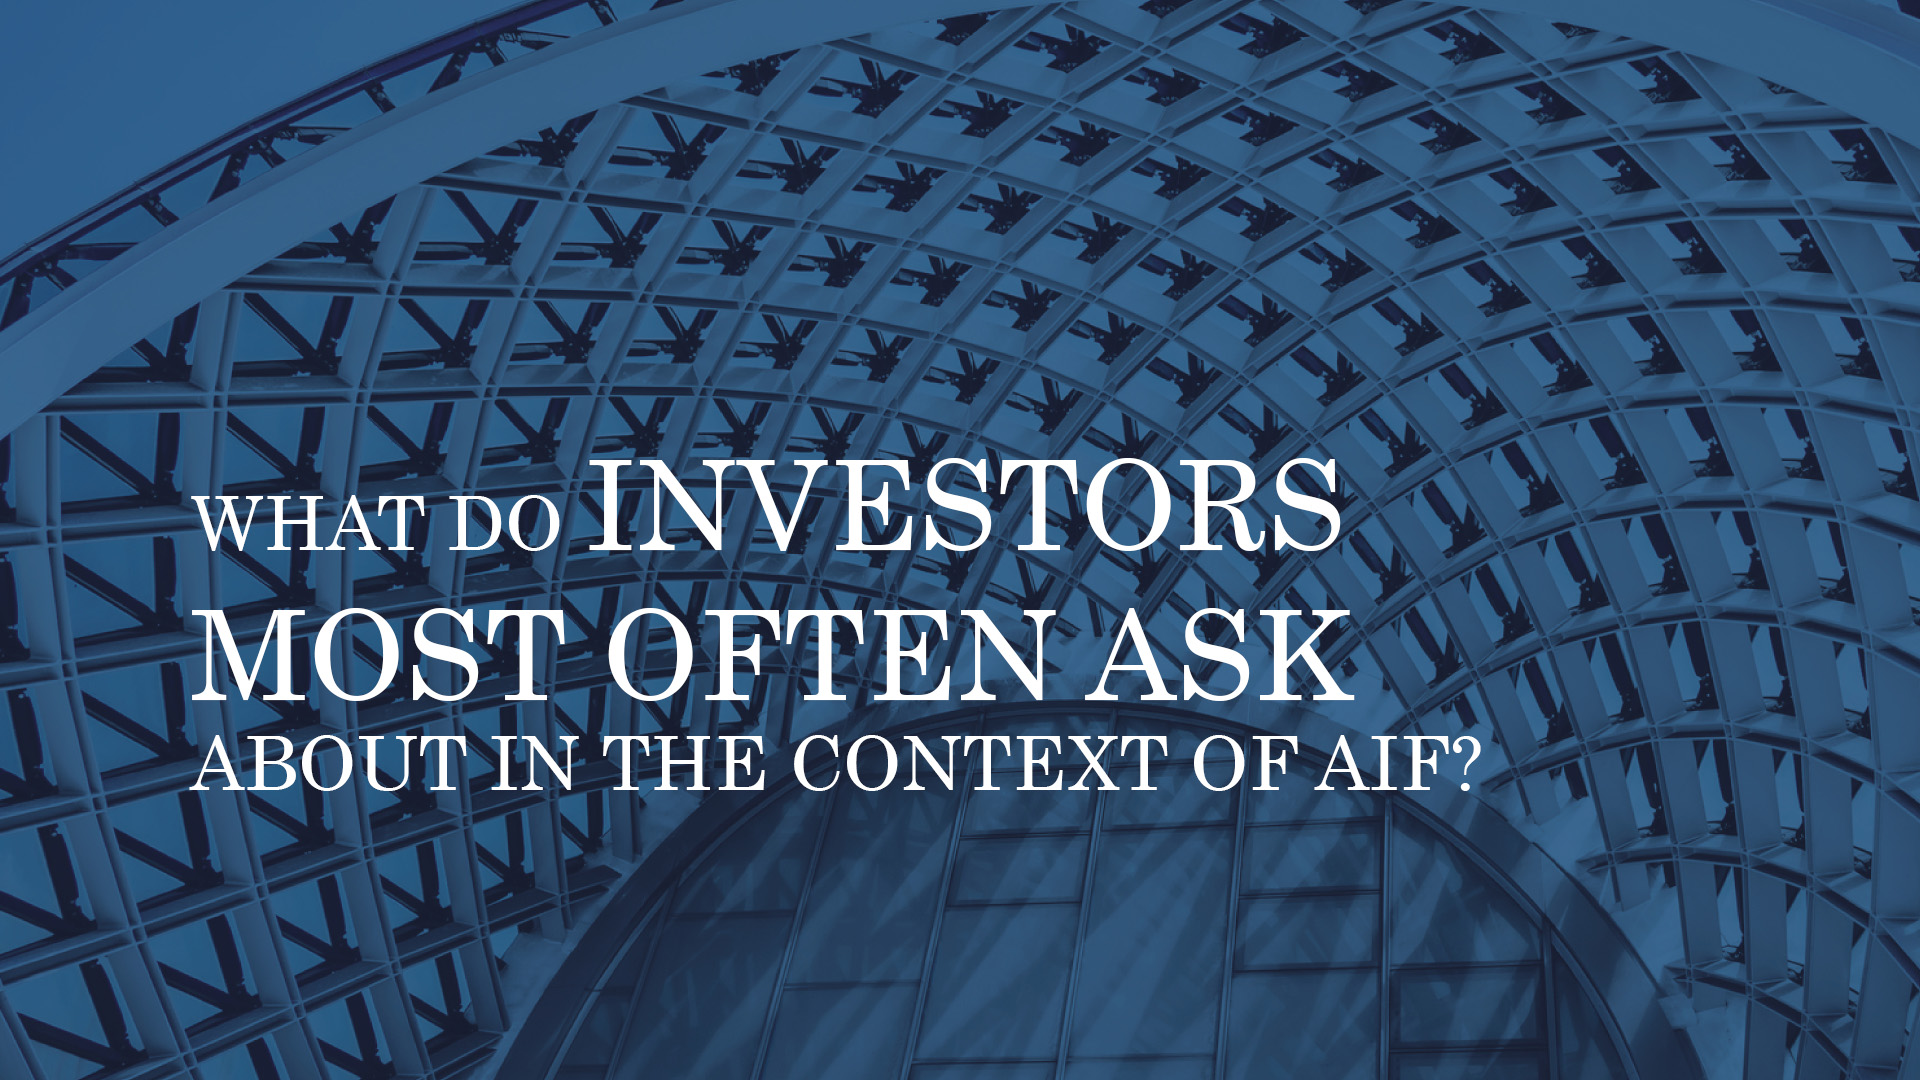 WHAT DO INVESTORS MOST OFTEN ASK ABOUT IN THE CONTEXT OF AIF (ALTERNATIVE INVESTMENT FUNDS)?